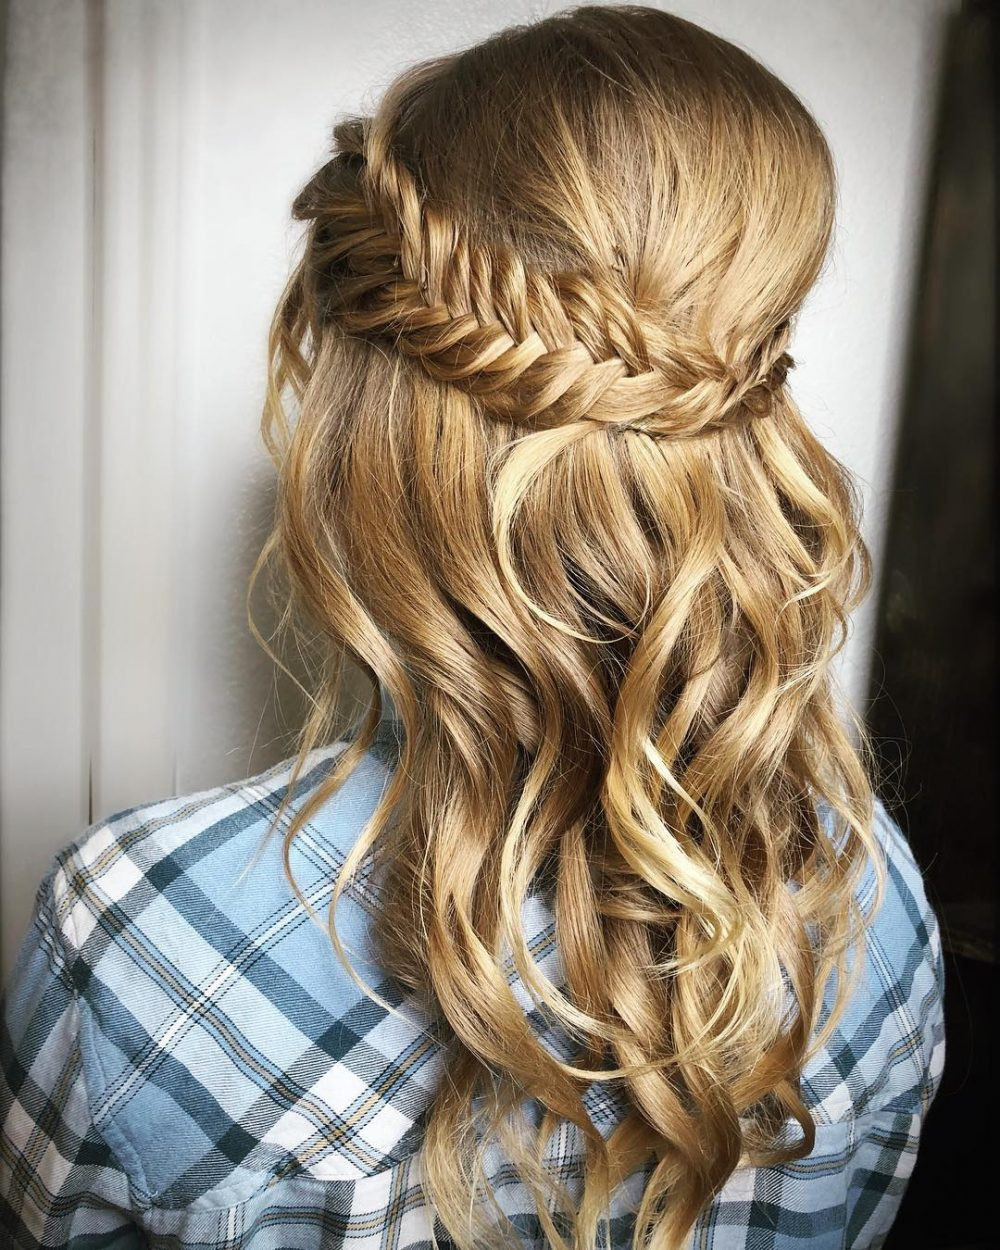 How To Prom Hairstyles
 27 Prettiest Half Up Half Down Prom Hairstyles for 2019